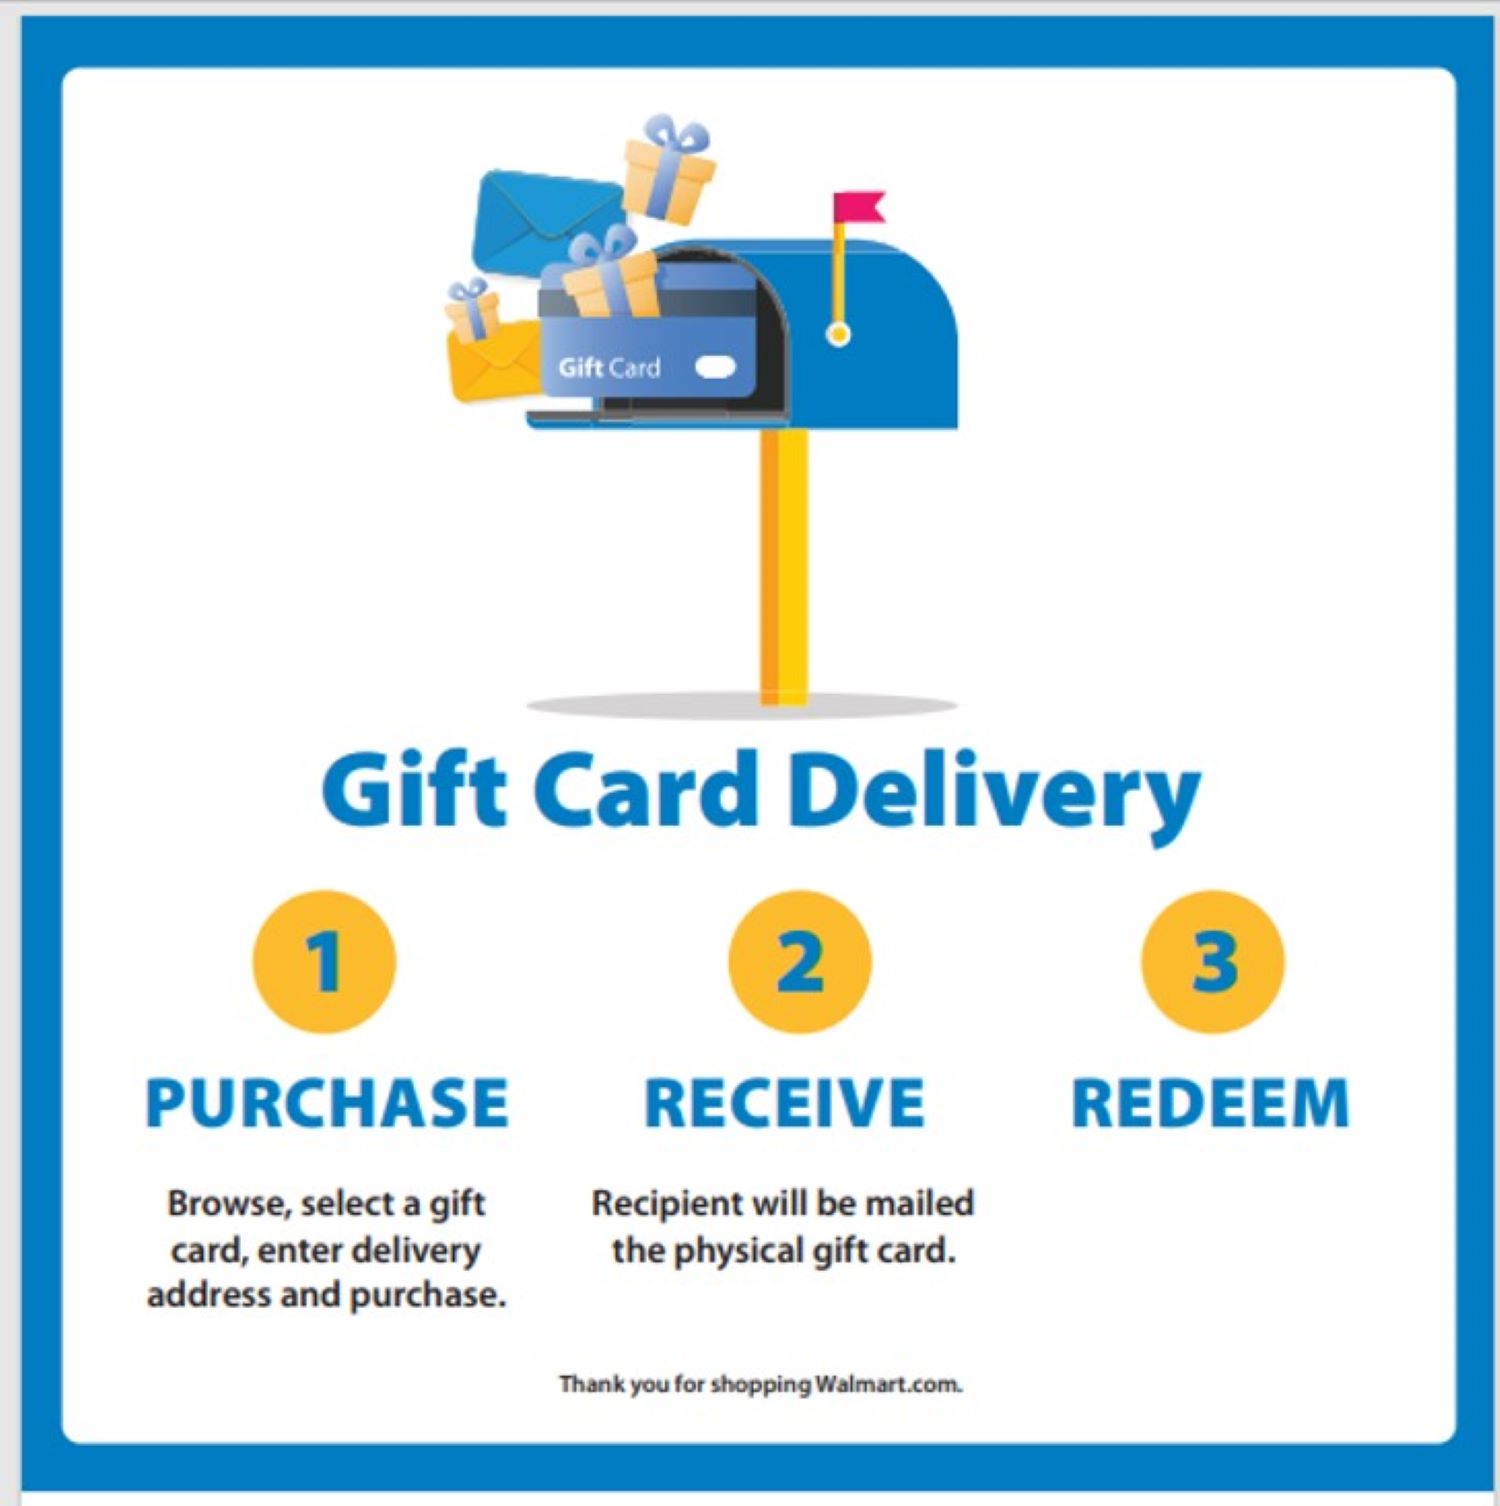 $10 PlayStation Store Gift Card 